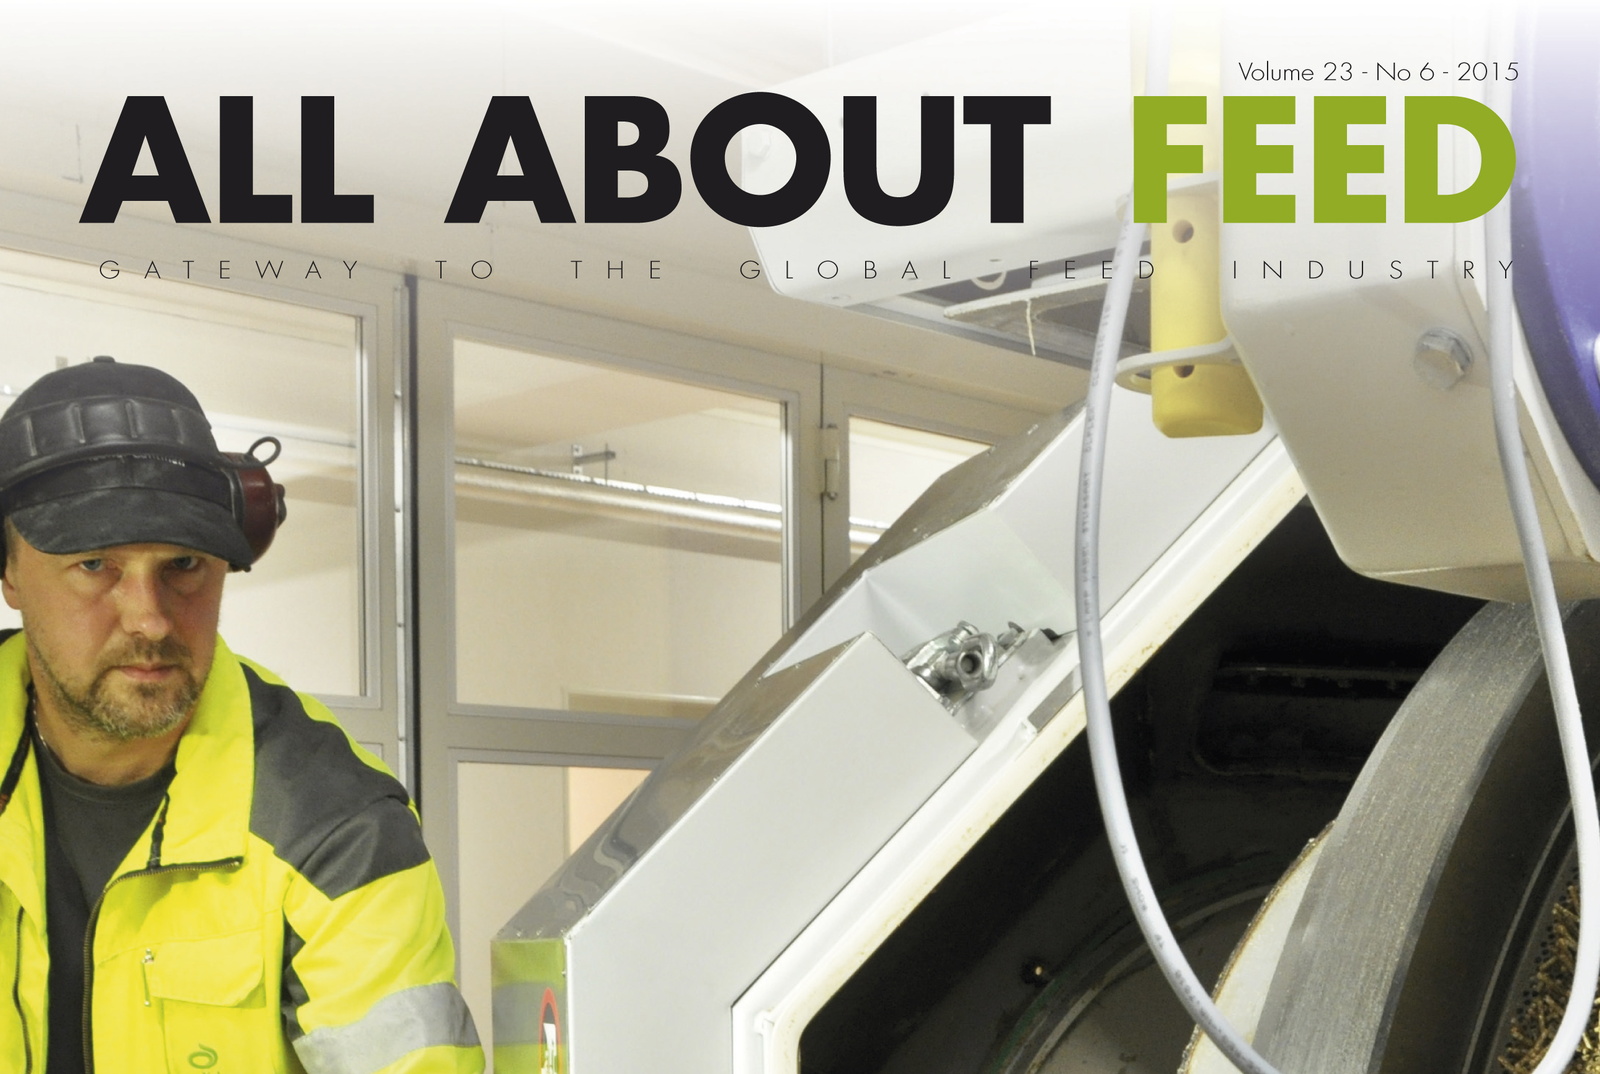 New issue of All About Feed now online